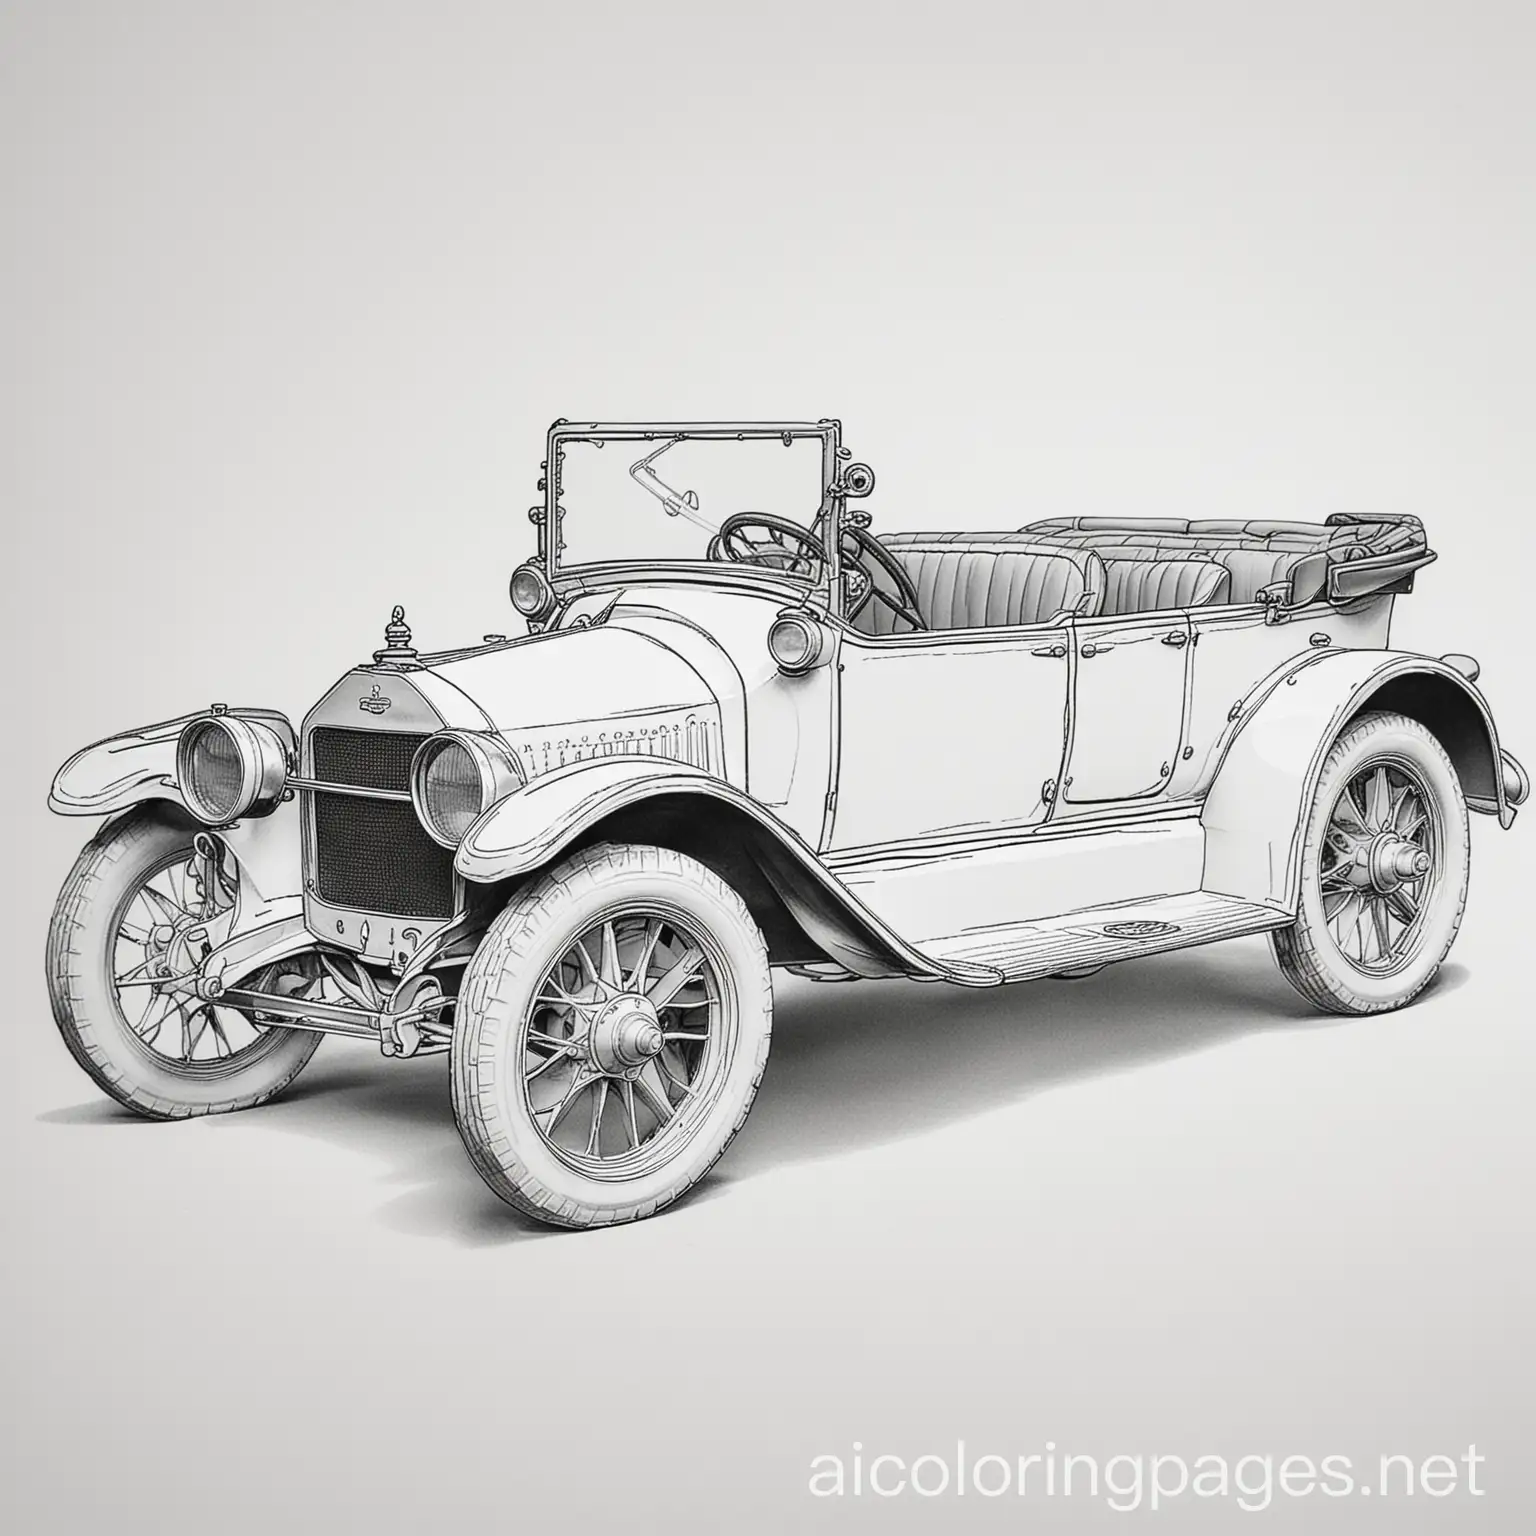 1912-Chevrolet-Classic-Six-Coloring-Page-for-Kids